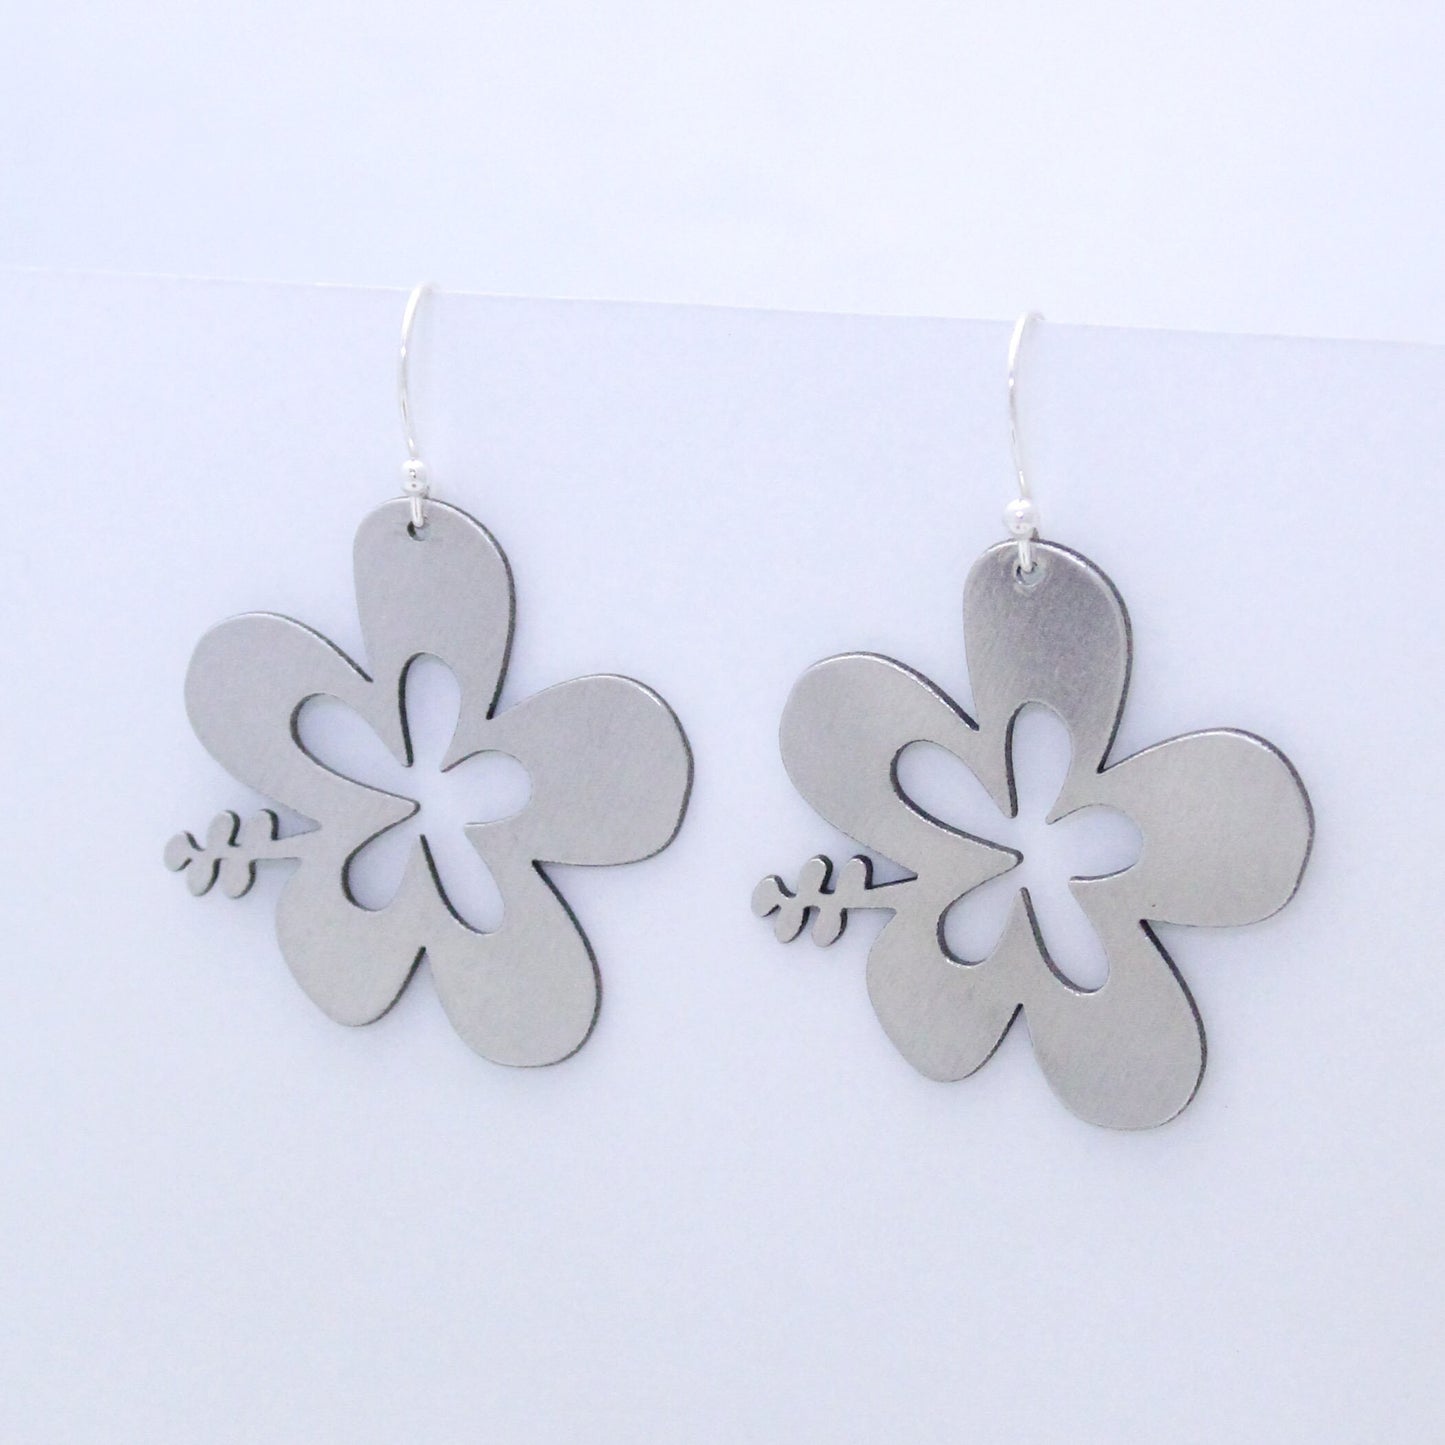 Cute Tropical Flower Earrings, Aluminum Hibiscus Flower Earrings, Cute Flower Jewelry, Plumeria Earrings, Mother's Day Gift, Gifts for Her